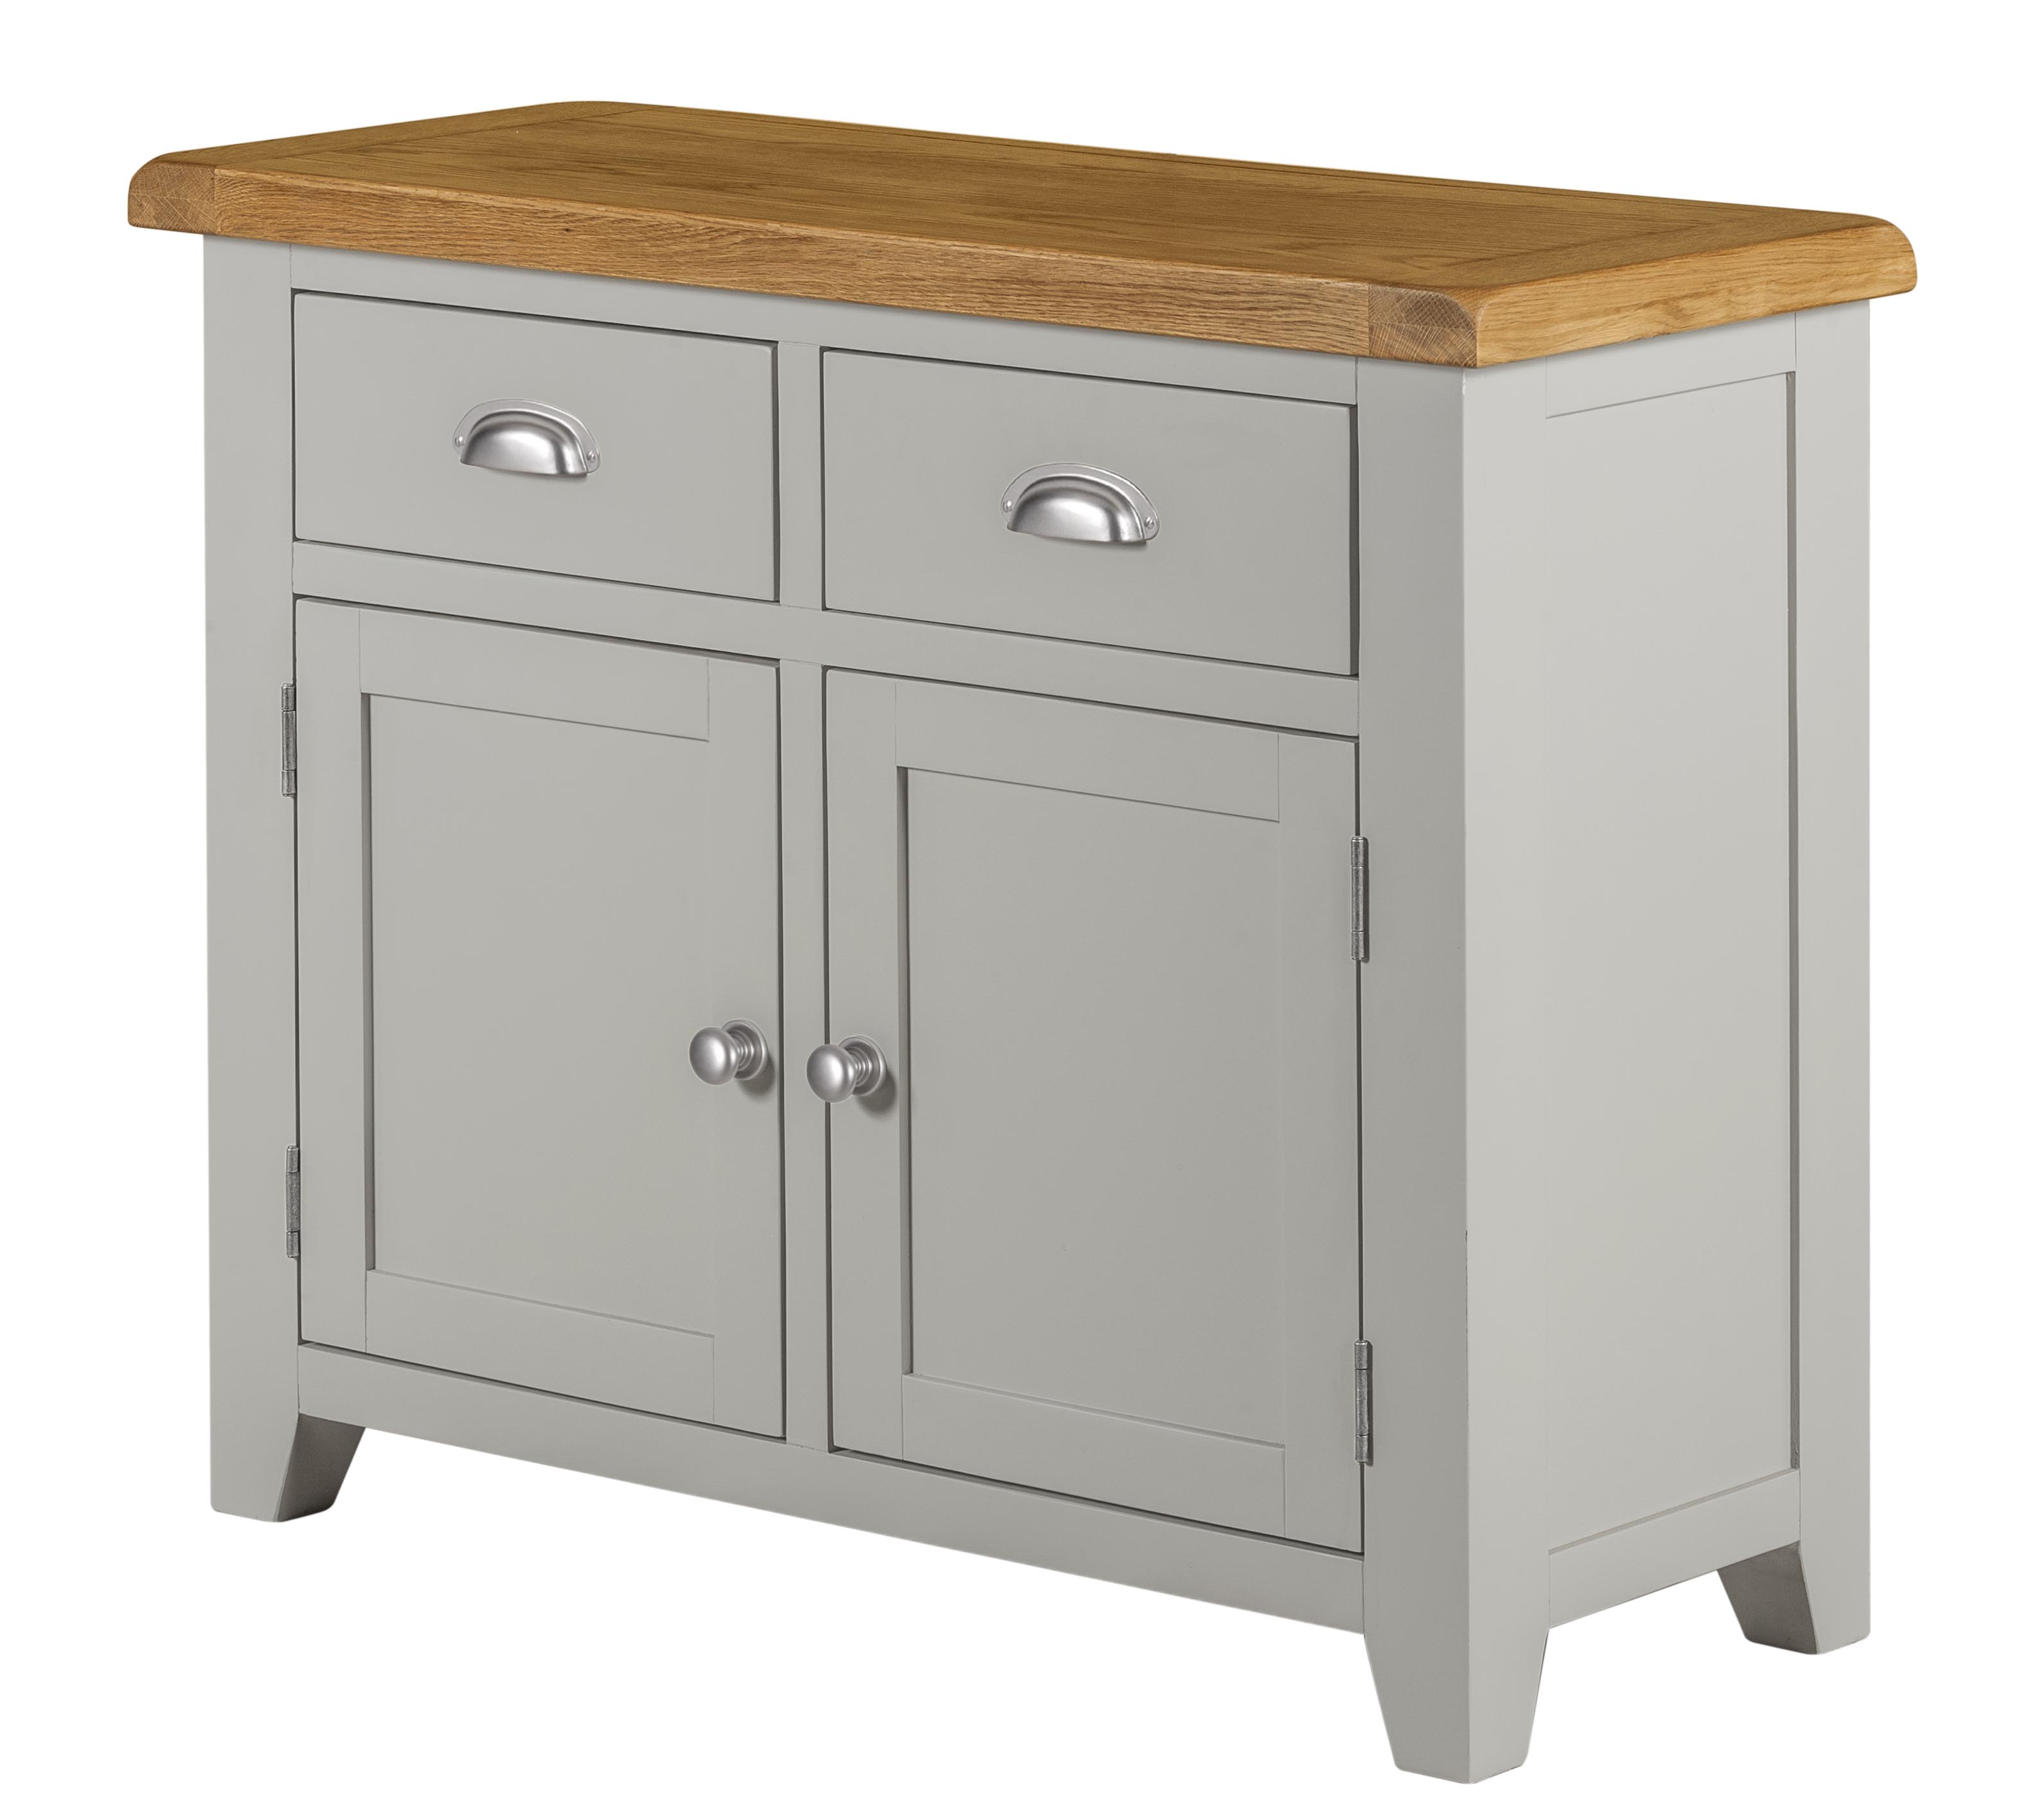 Wexford American Oak Solid Wood Sideboard with 2 Doors and 2 Drawers